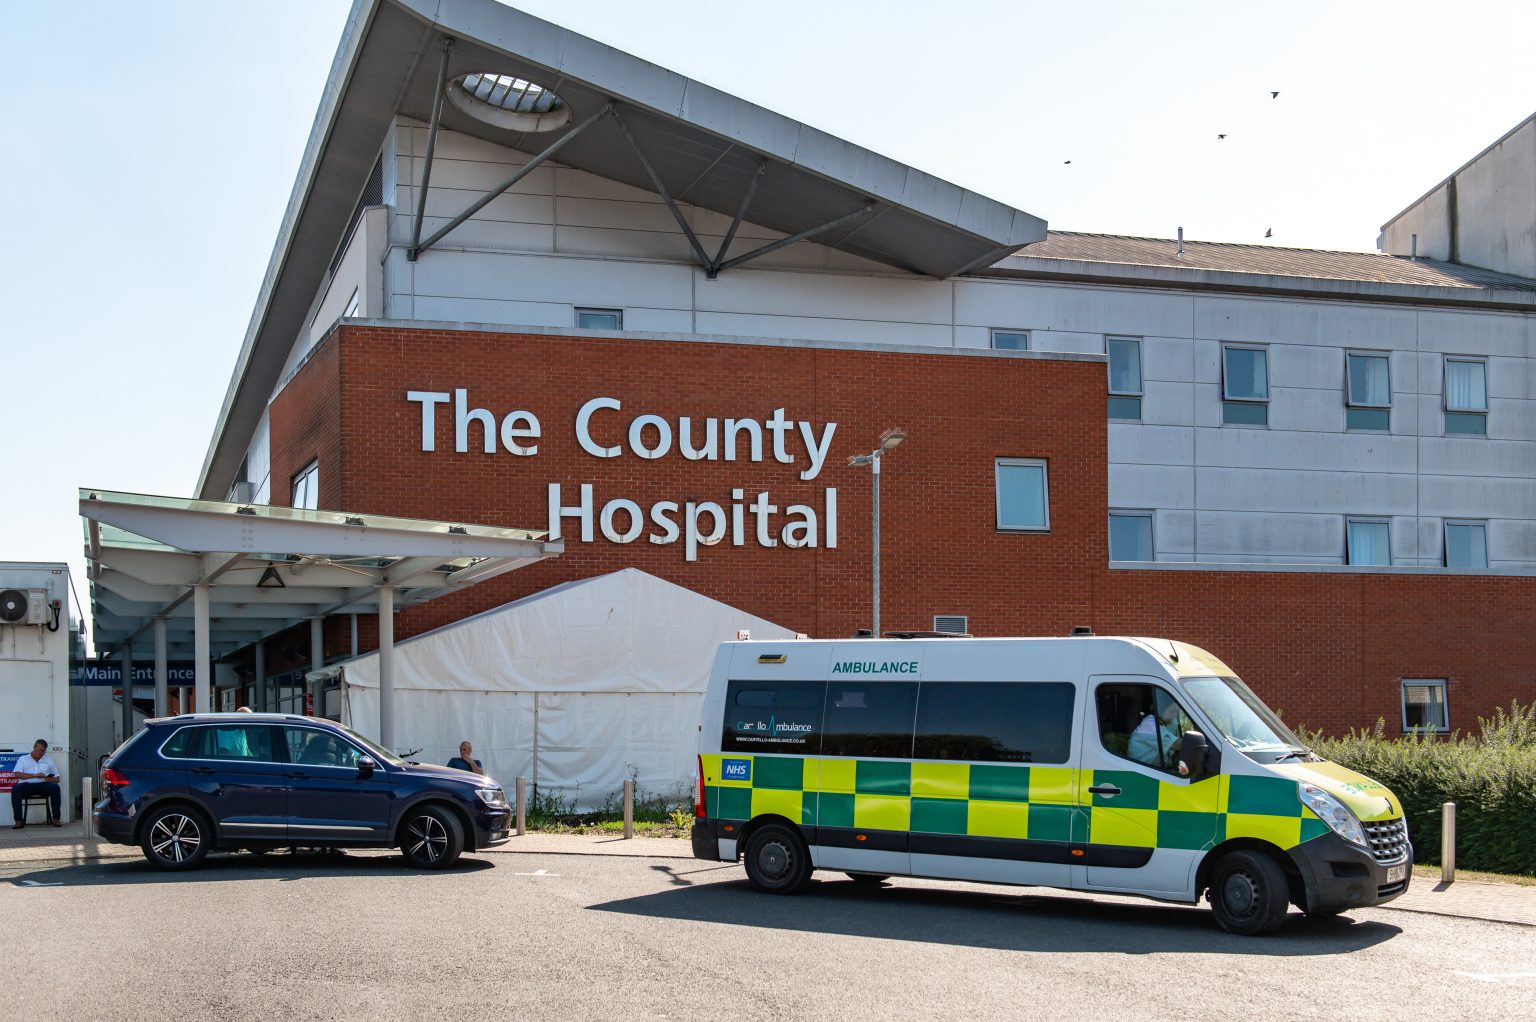 NEWS | A small number of wards at hospitals in Herefordshire have been closed due to increase in COVID-19 cases